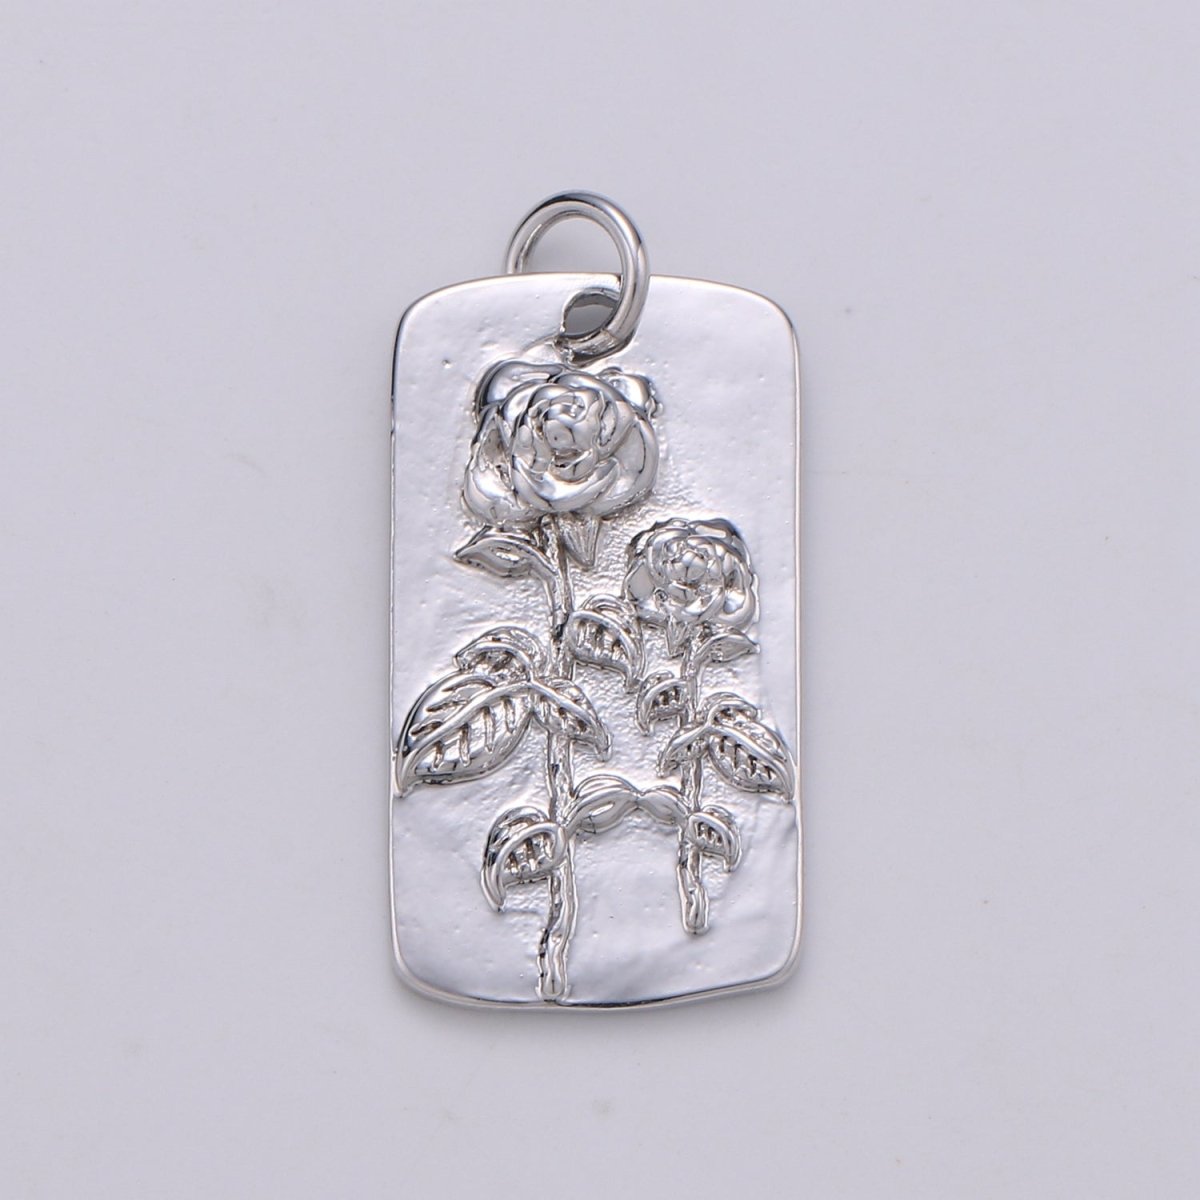 Silver Flower Charms, Wild Flower Pendant, Dainty Flower Charm, Small SunFlower Daisy, Hibiscus Charm for Necklace Floral Flower Jewelry D-844 TO D-852 - DLUXCA